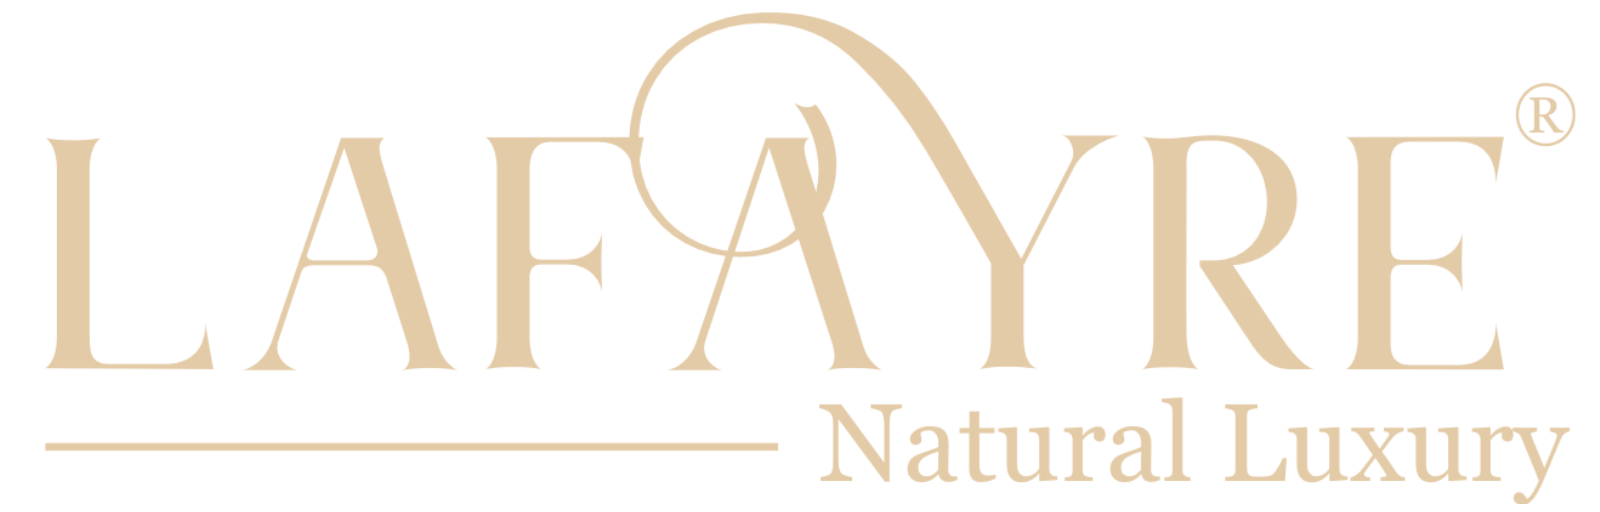 lafayre natural luxury logo in gold